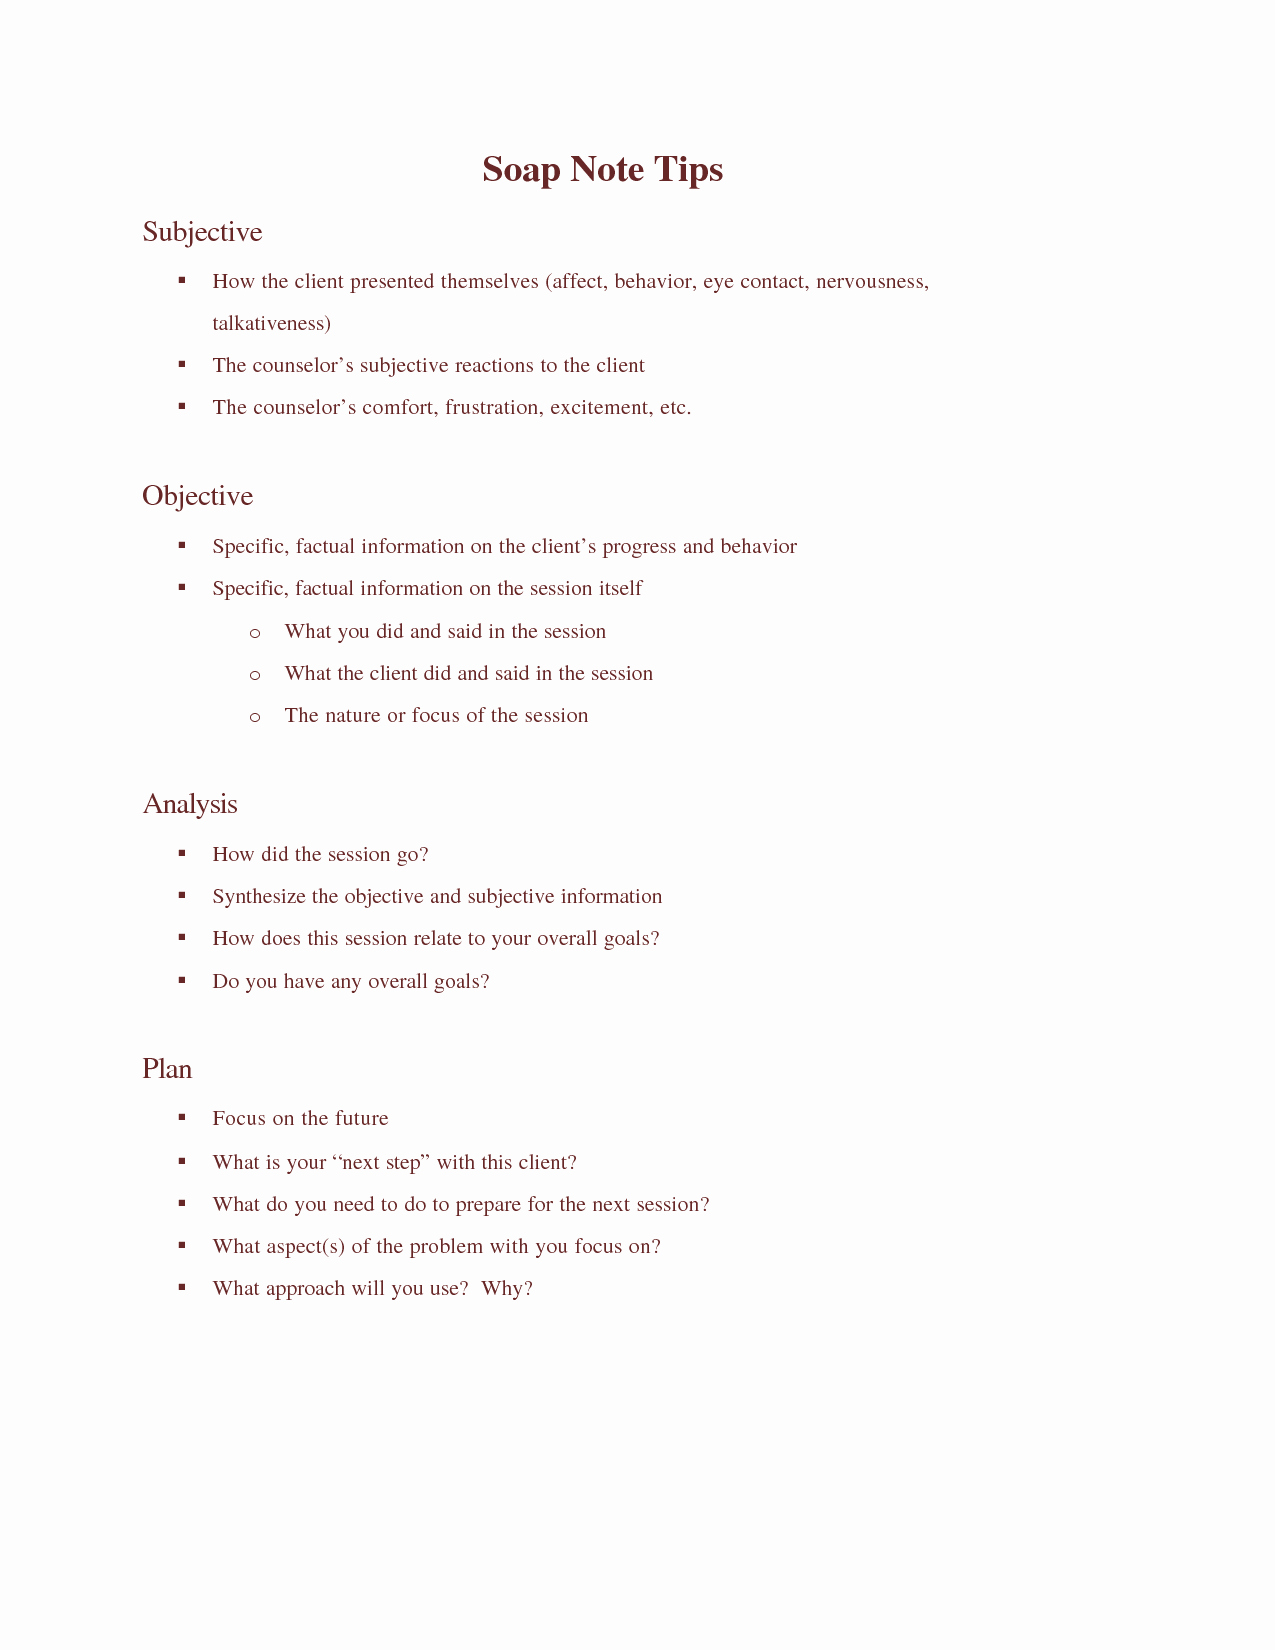 Soap therapy Note Template Fresh soap Note Templates In This soap Note and Progress Note